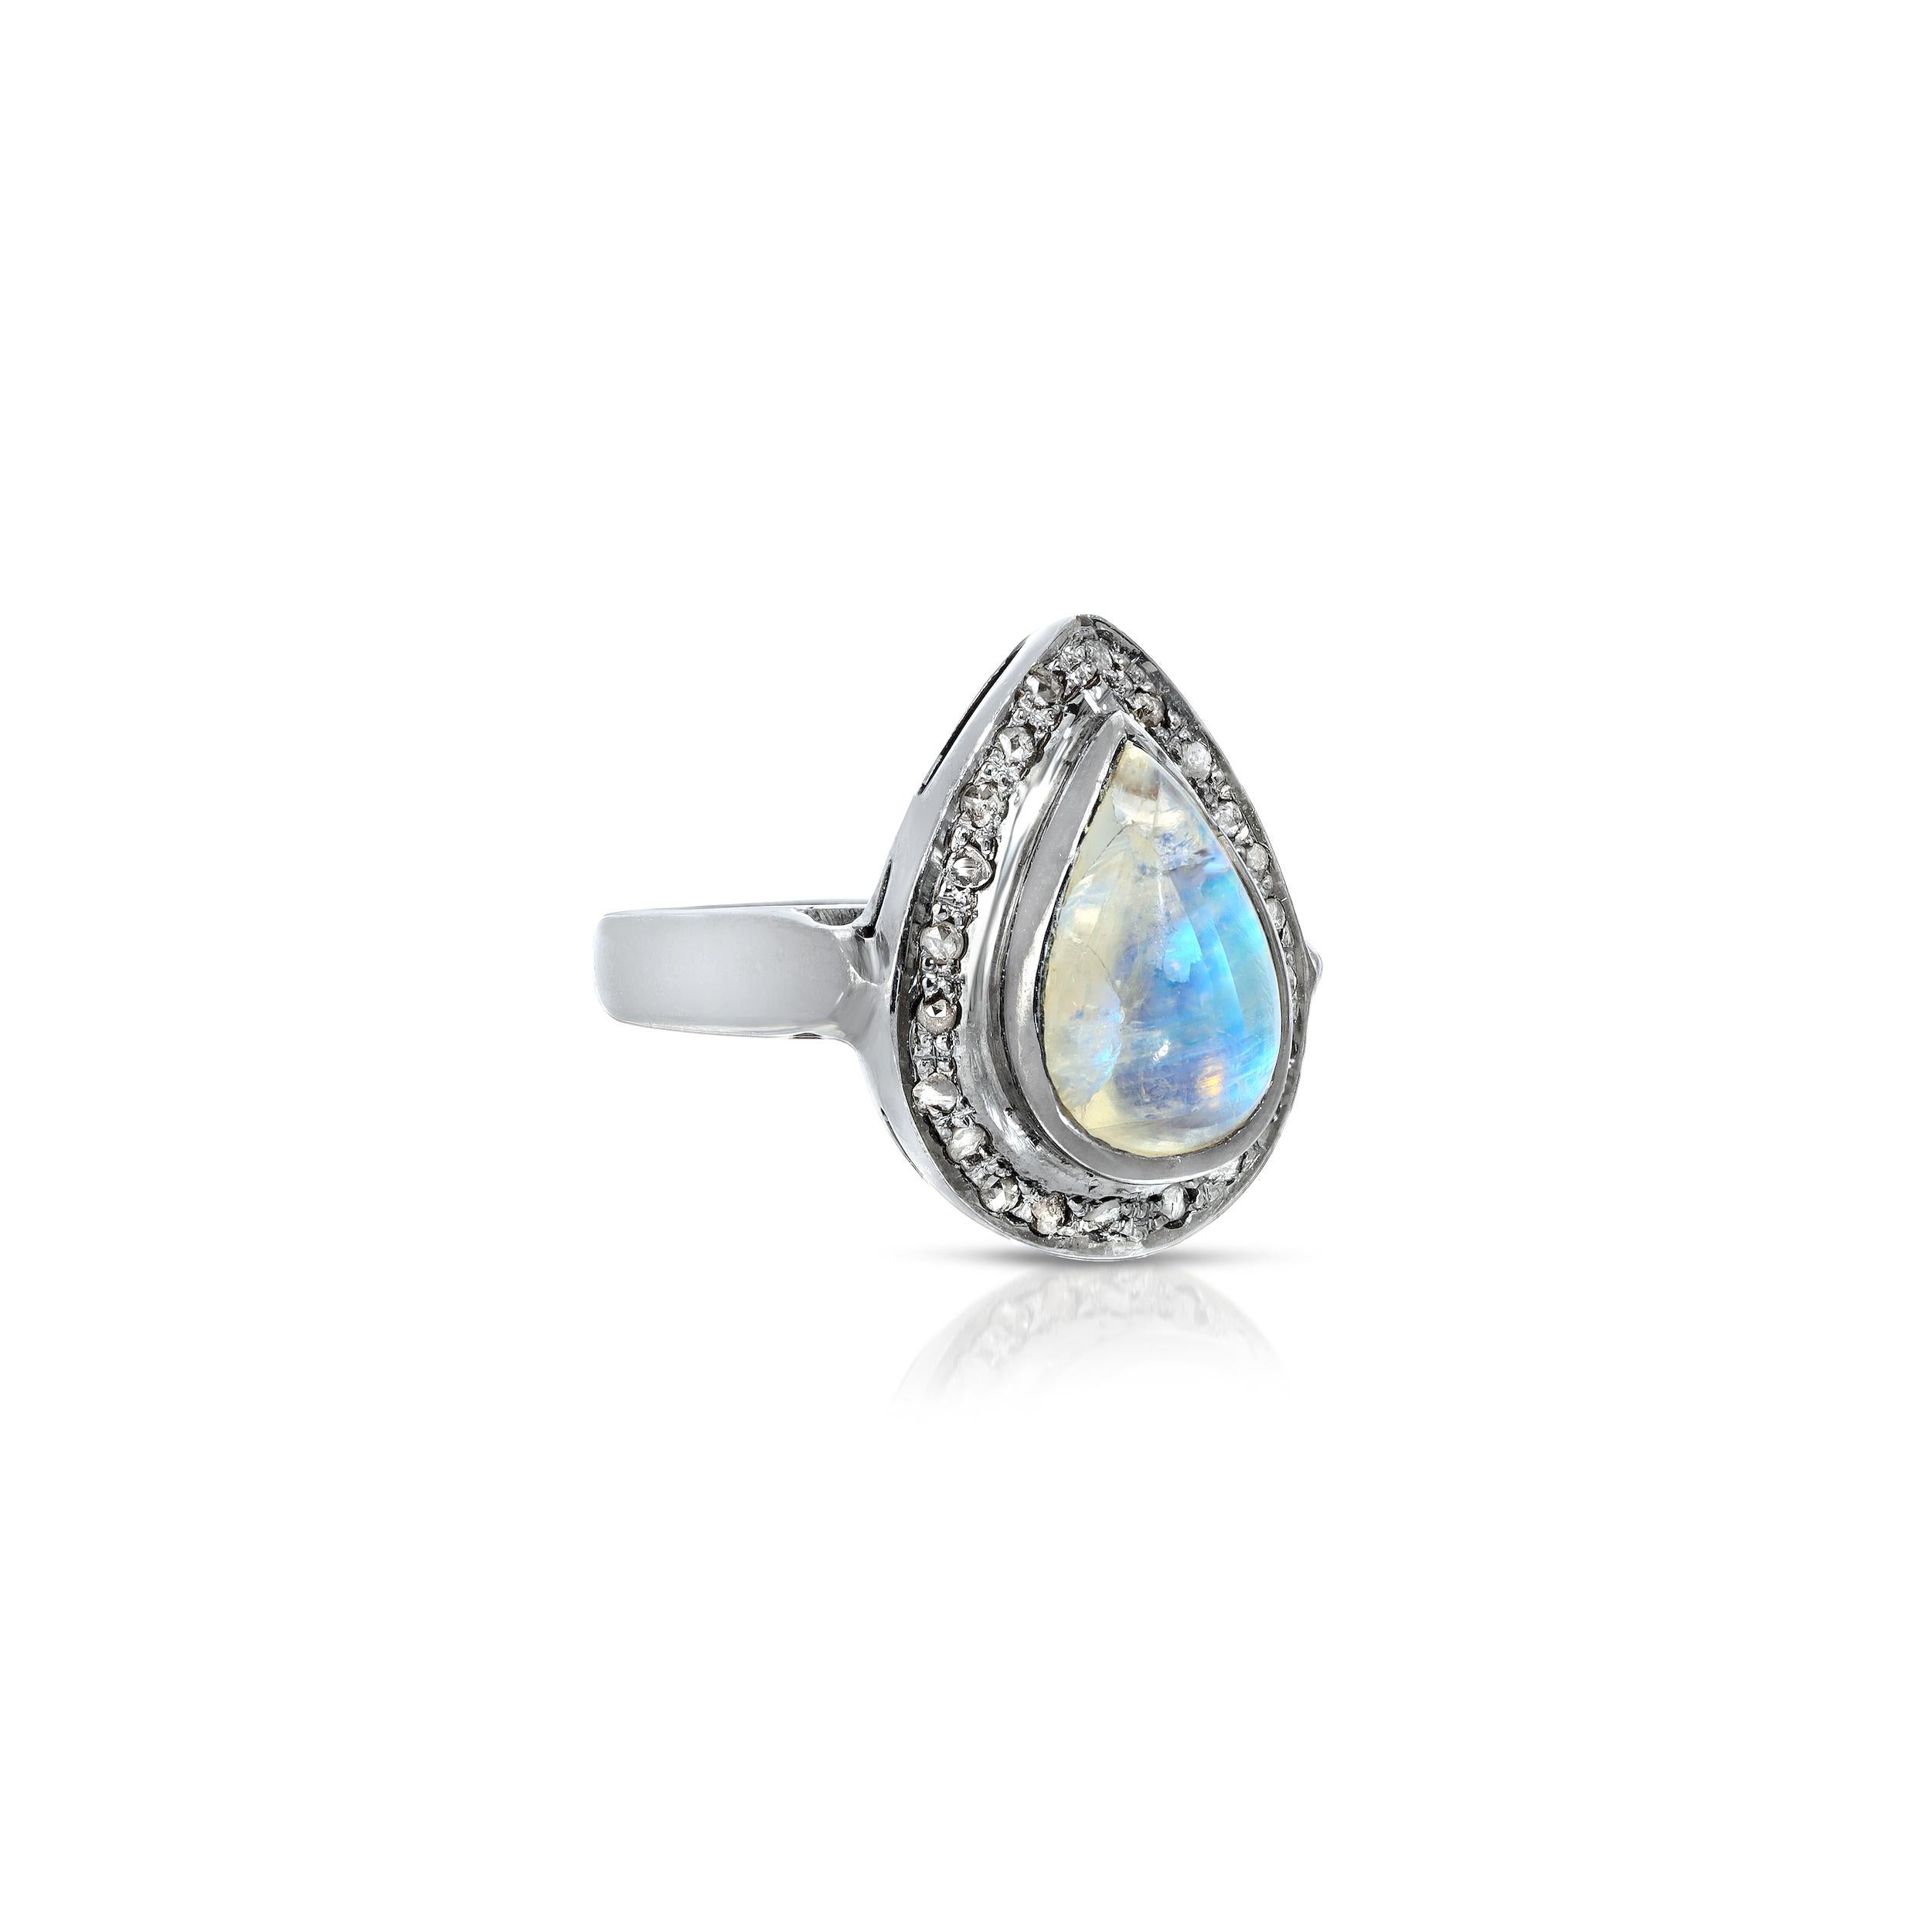 A 2.80 Karats pear shaped Moonstone with shimmering iridescent icy blue hues and beautiful ribbons in the gem stone set with .30 Carats of White Diamonds in nouveau Victorian style statement ring of Blackened Oxidized Silver.